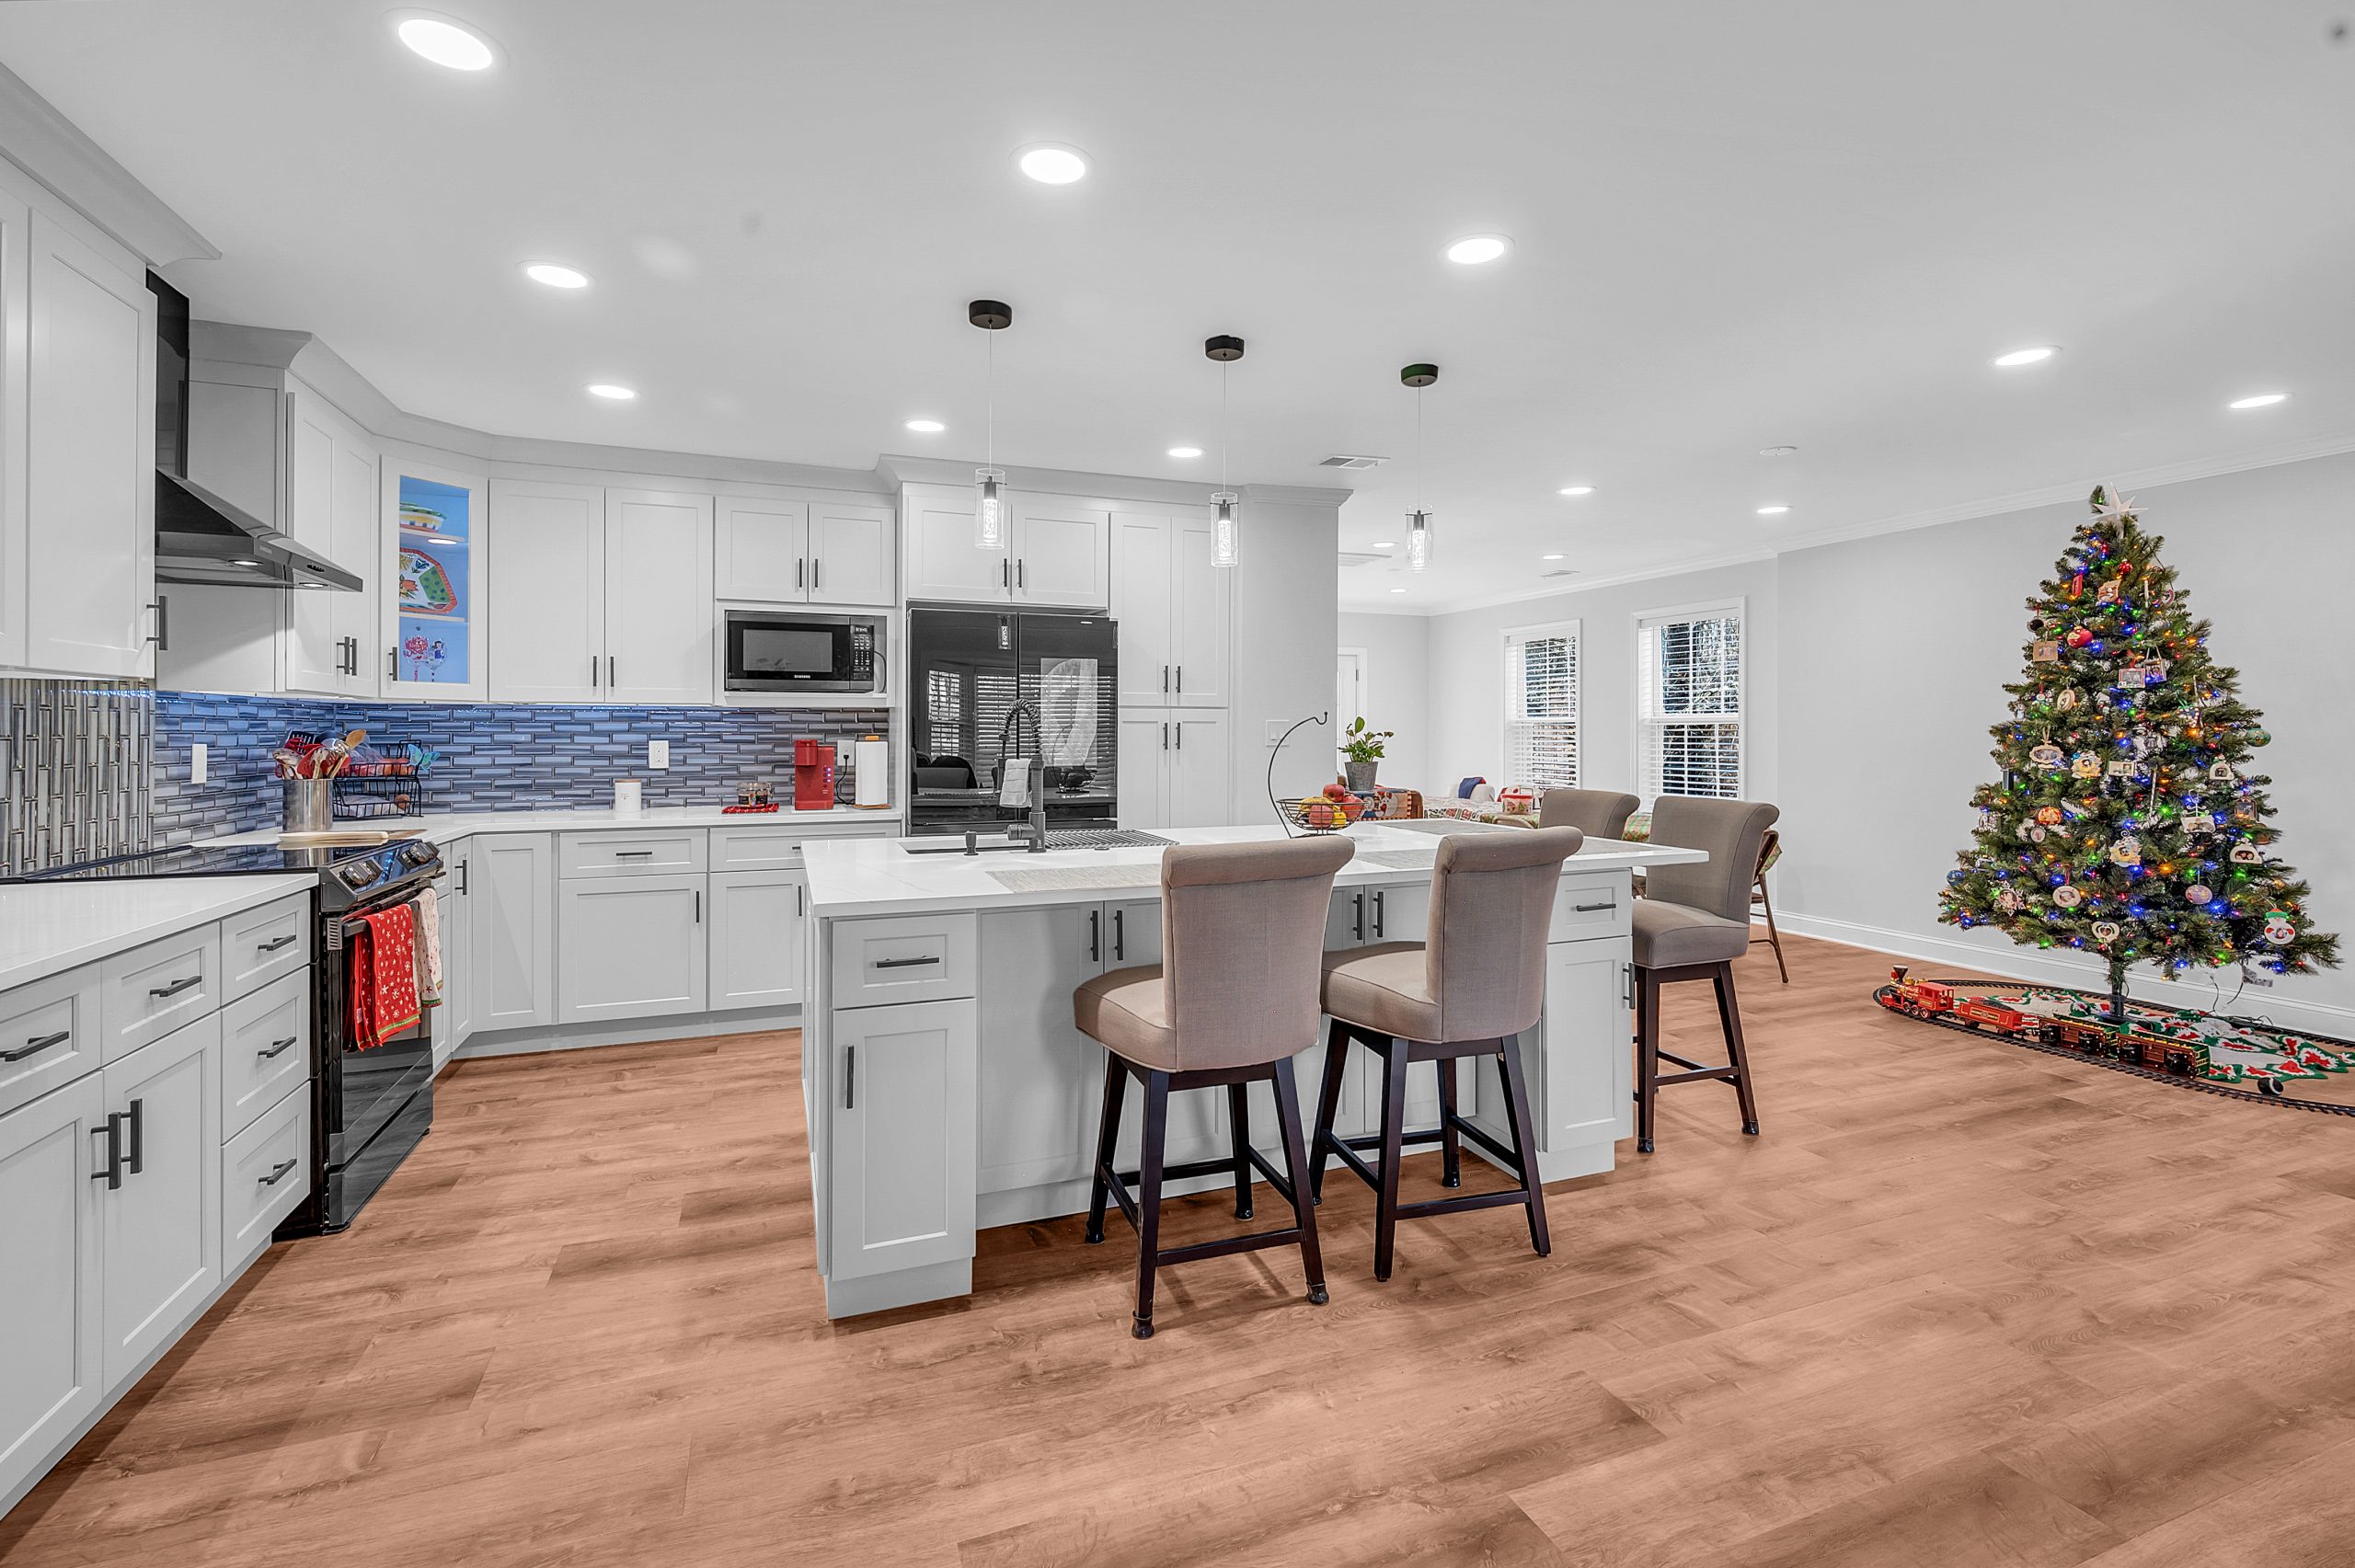 pacious kitchen and dining area in a room addition by Mosaic Design & Build, featuring white cabinetry, stainless steel appliances, blue tile backsplash, and hardwood floors, with a decorated Christmas tree adding a festive touch to the room in Fairfax